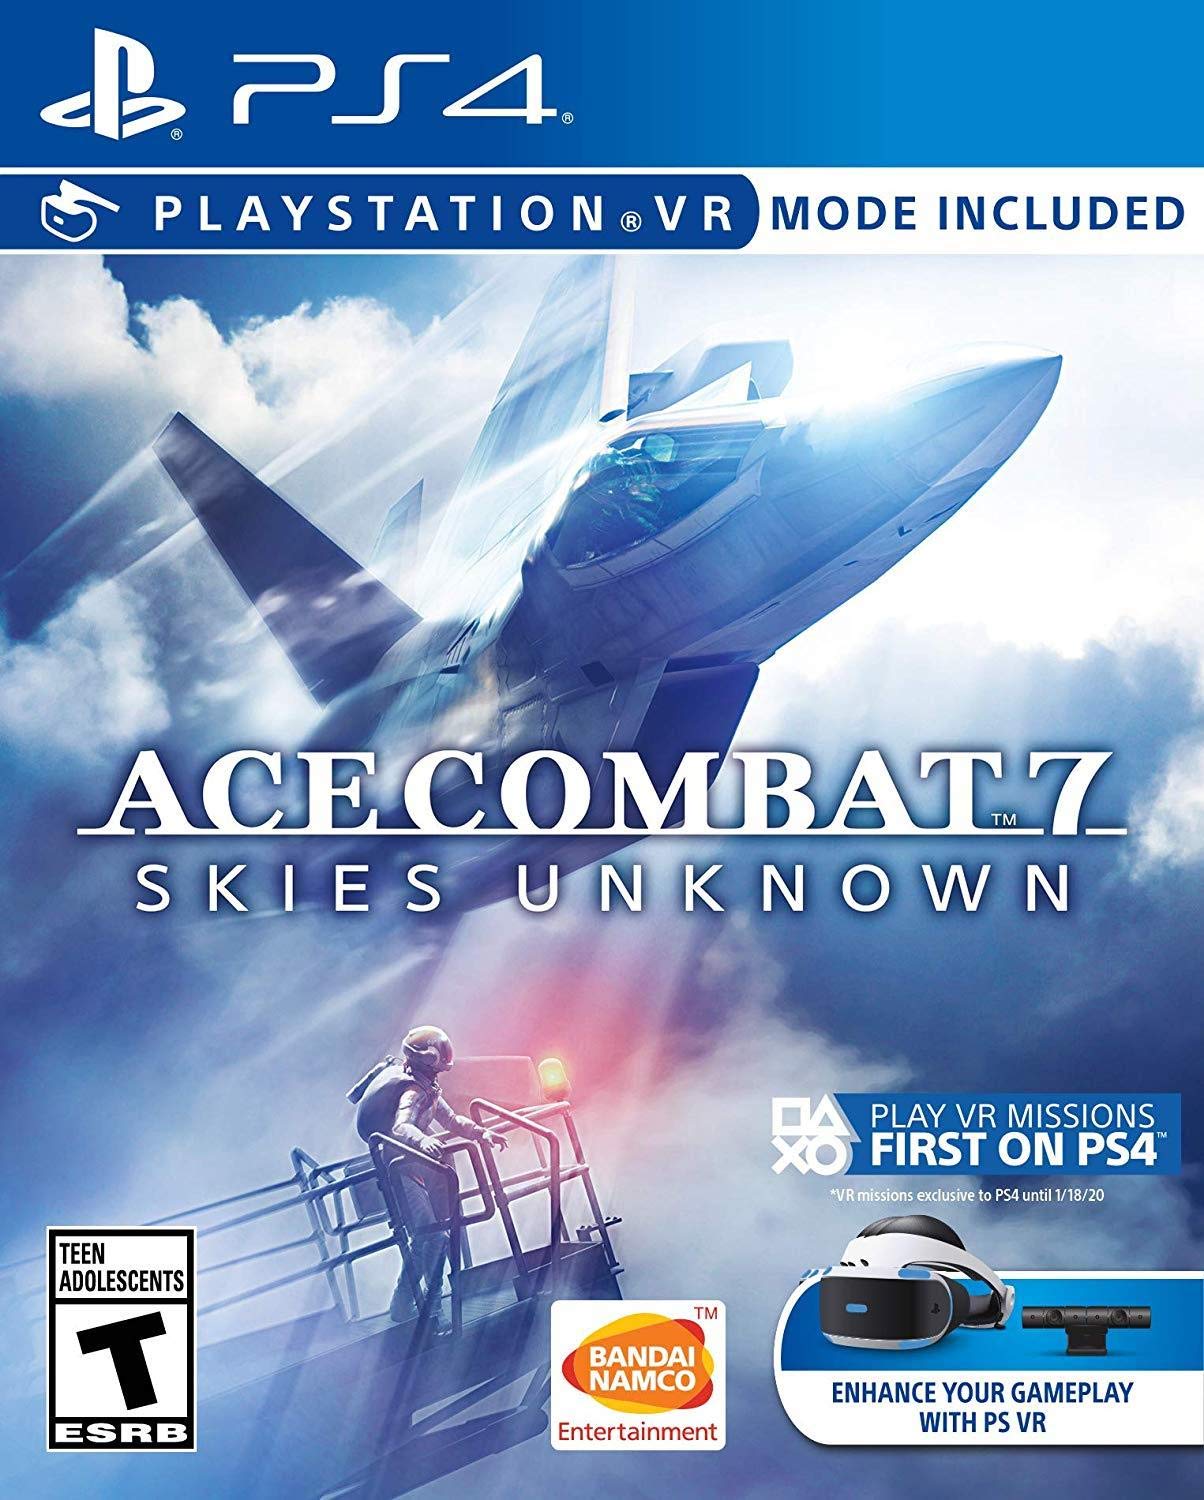 Ace combat™ 7: skies unknown ps4 - $9 at PC Richard and Playstation Store